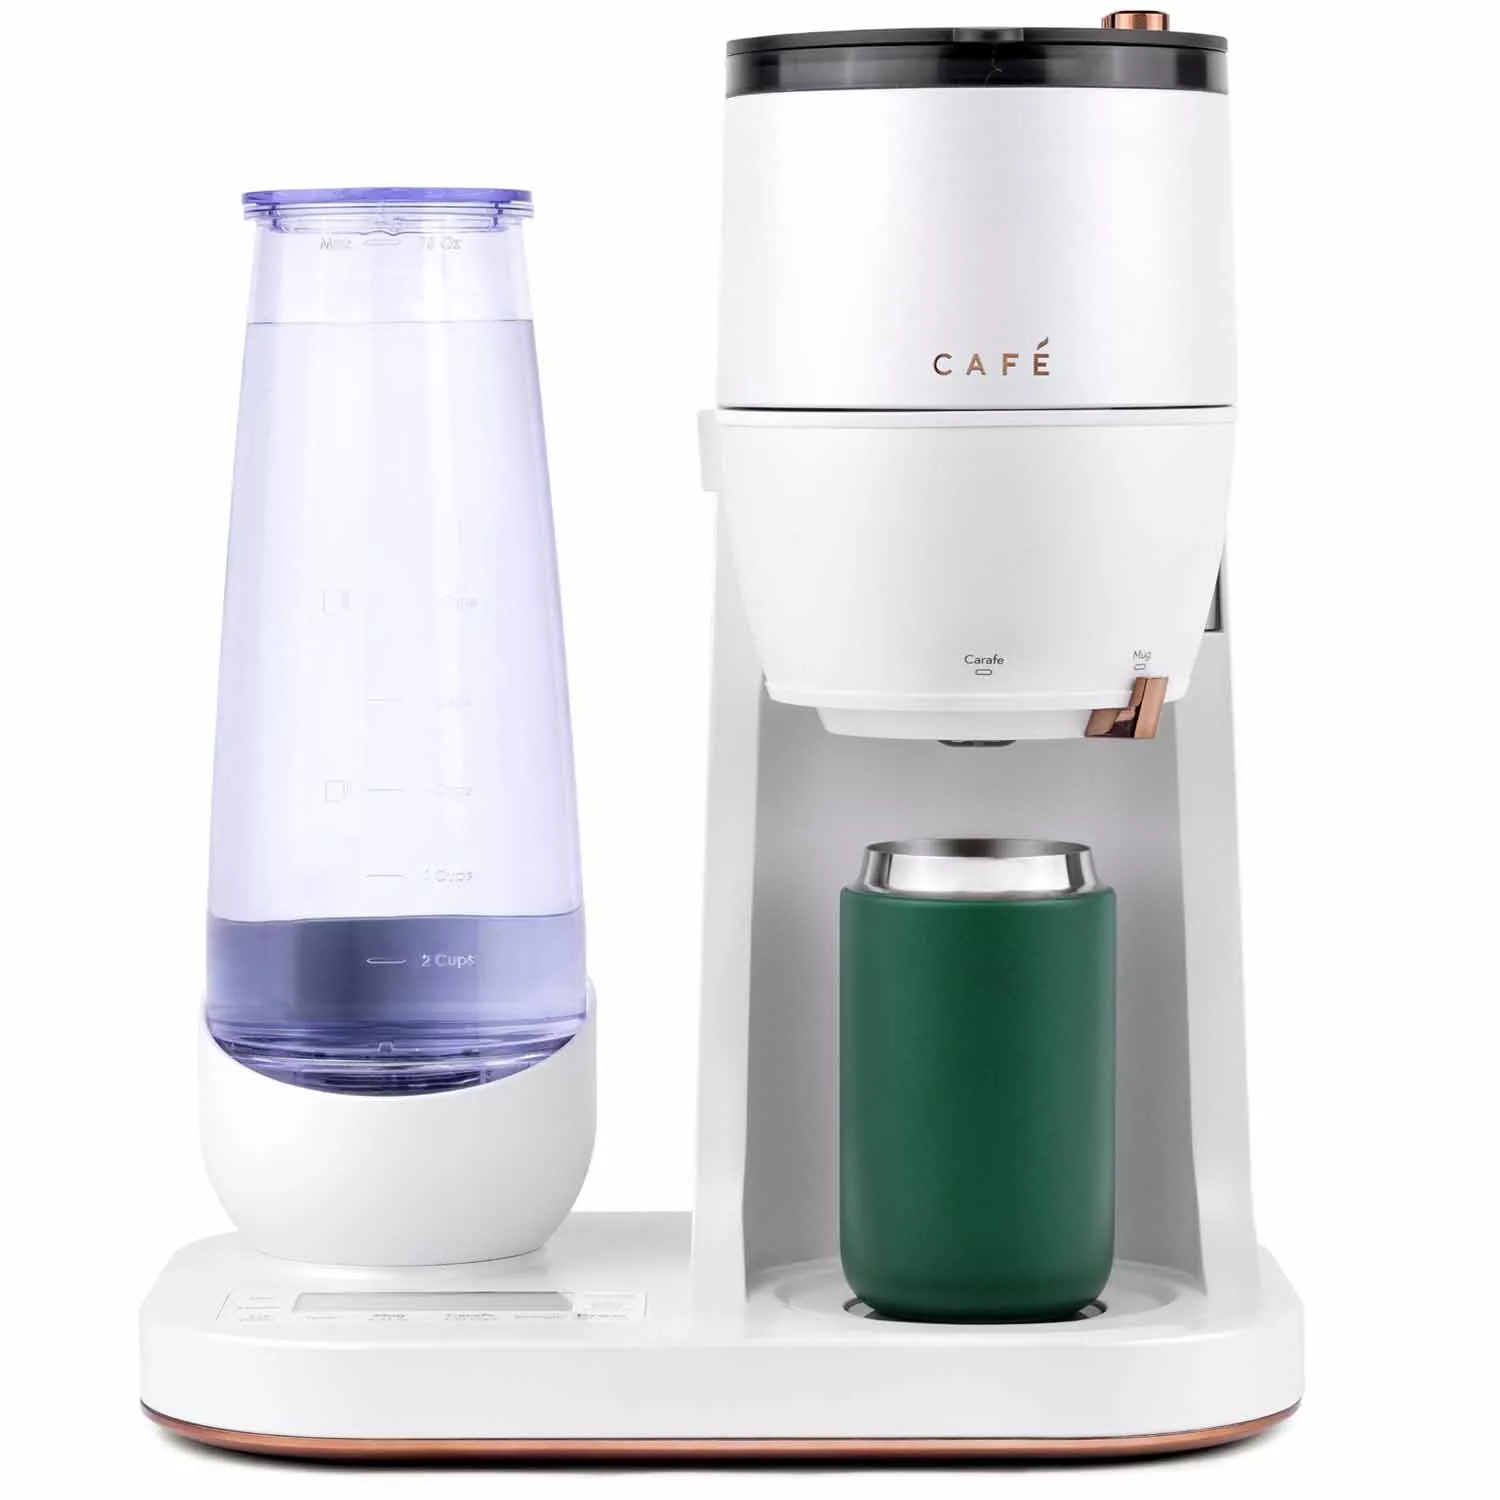 Cafe Cafã Specialty Grind and Brew Coffee Maker with Thermal Carafe White